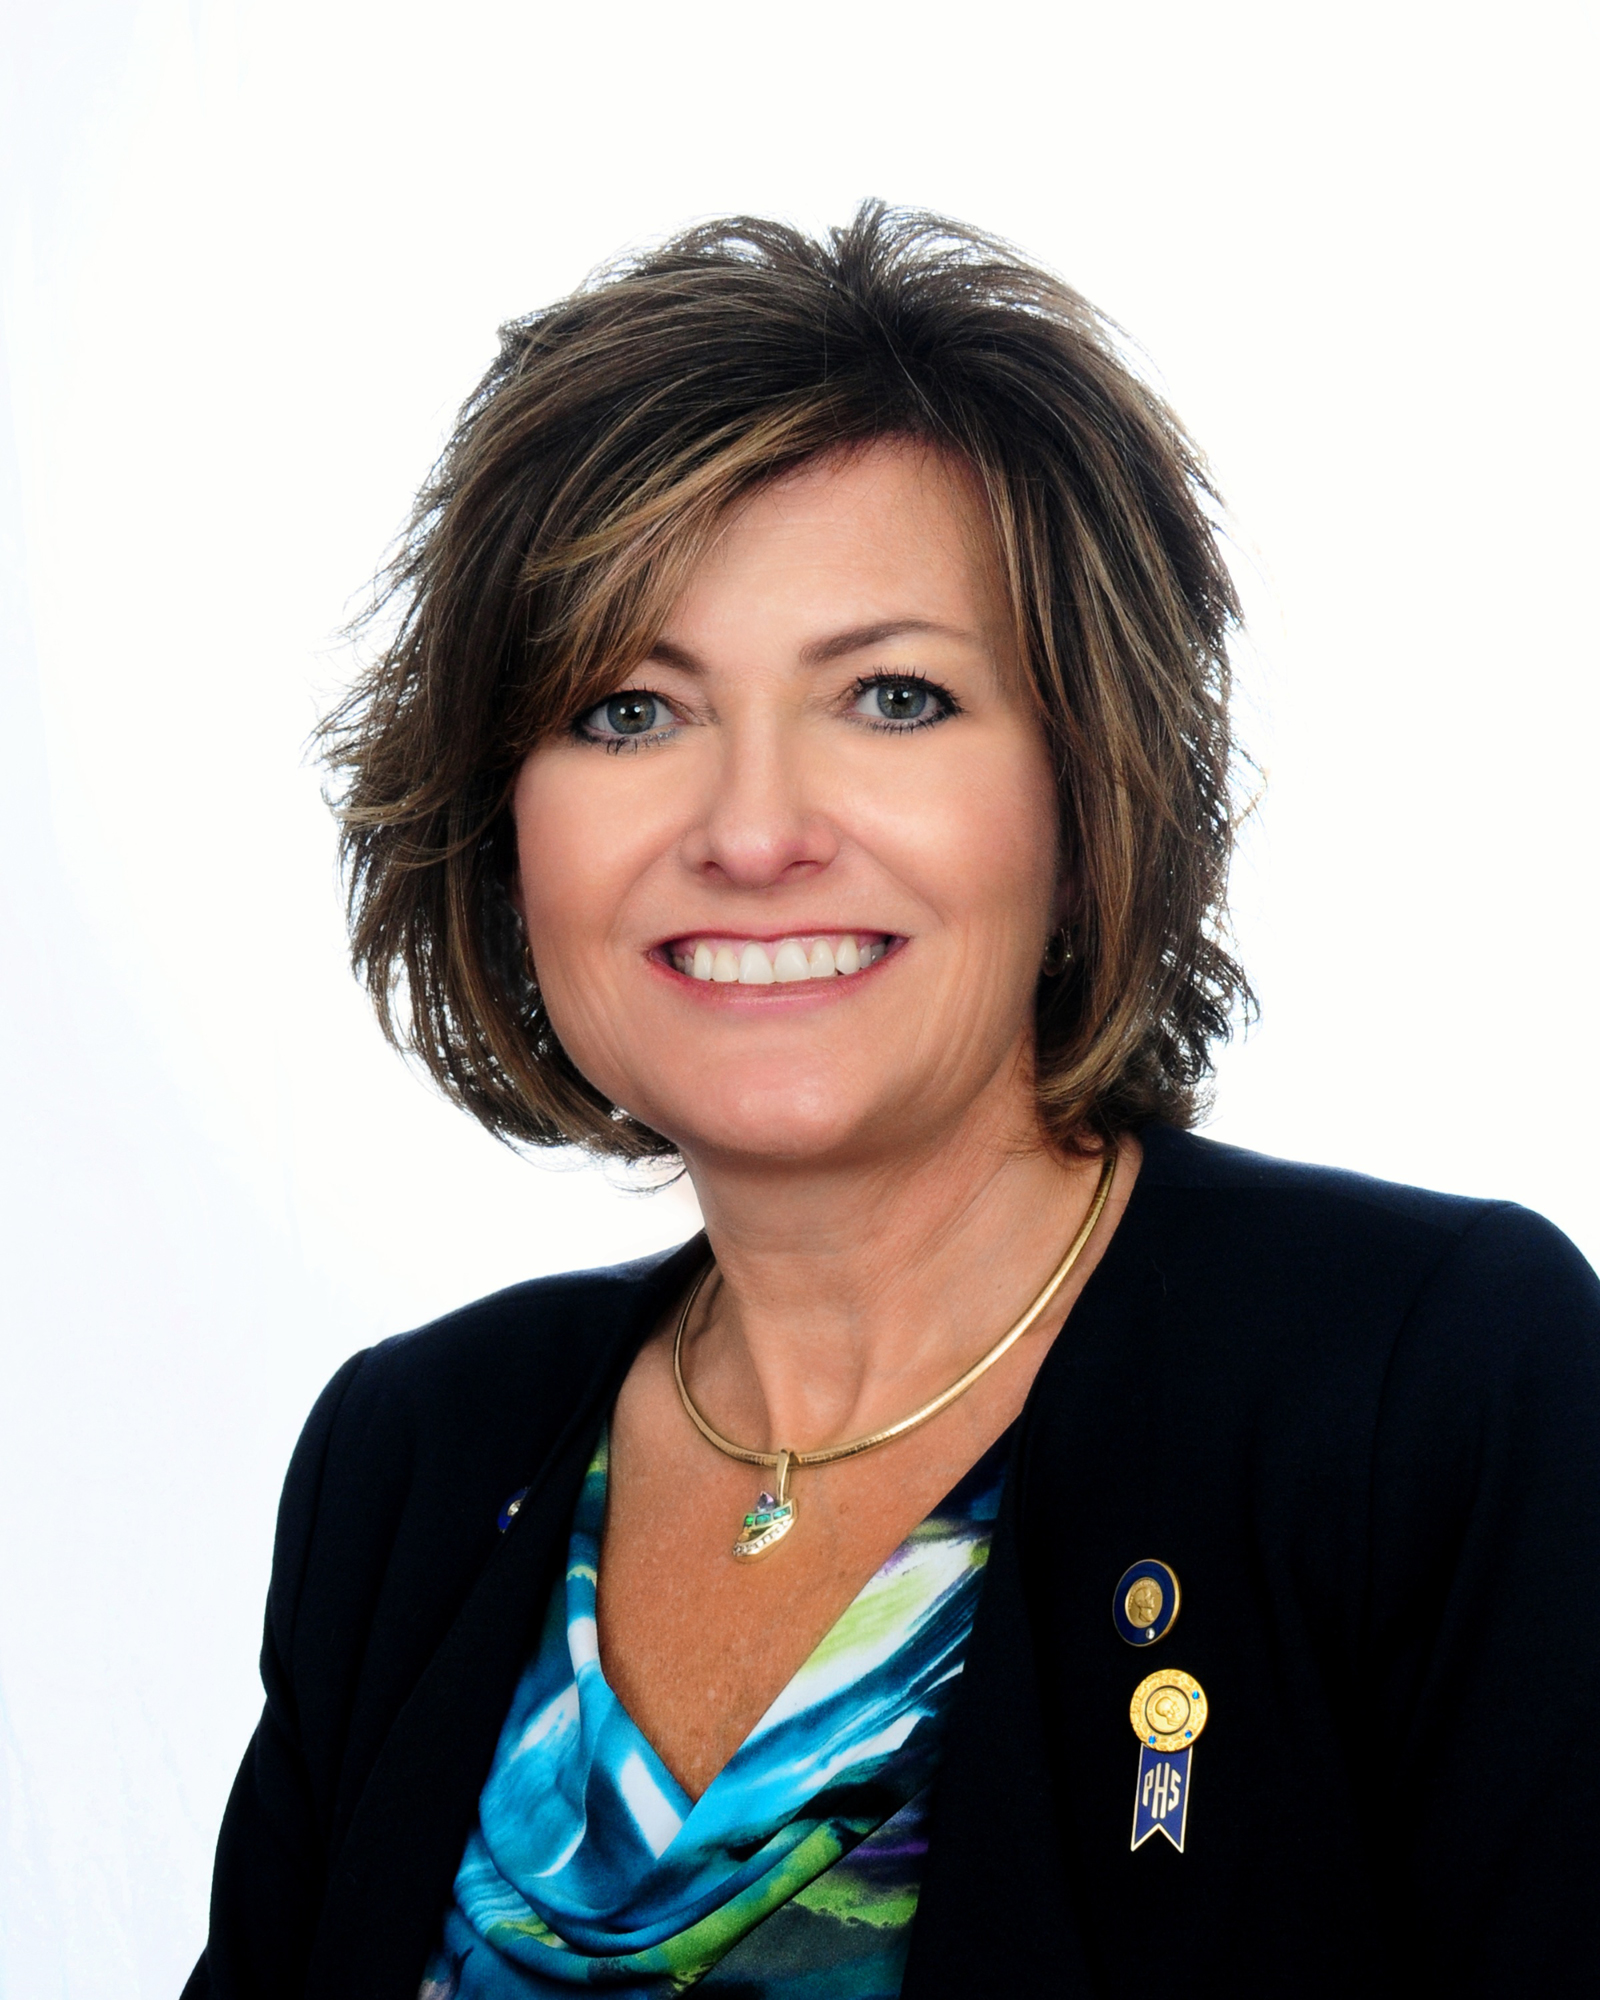 Rotary Club of Flagler County is pleased to announce that its member, Jeanette Loftus, has assumed the volunteer role of district governor for Rotary International’s District 6970 for 2018-2019. Photo courtesy of Marketing 2 Go